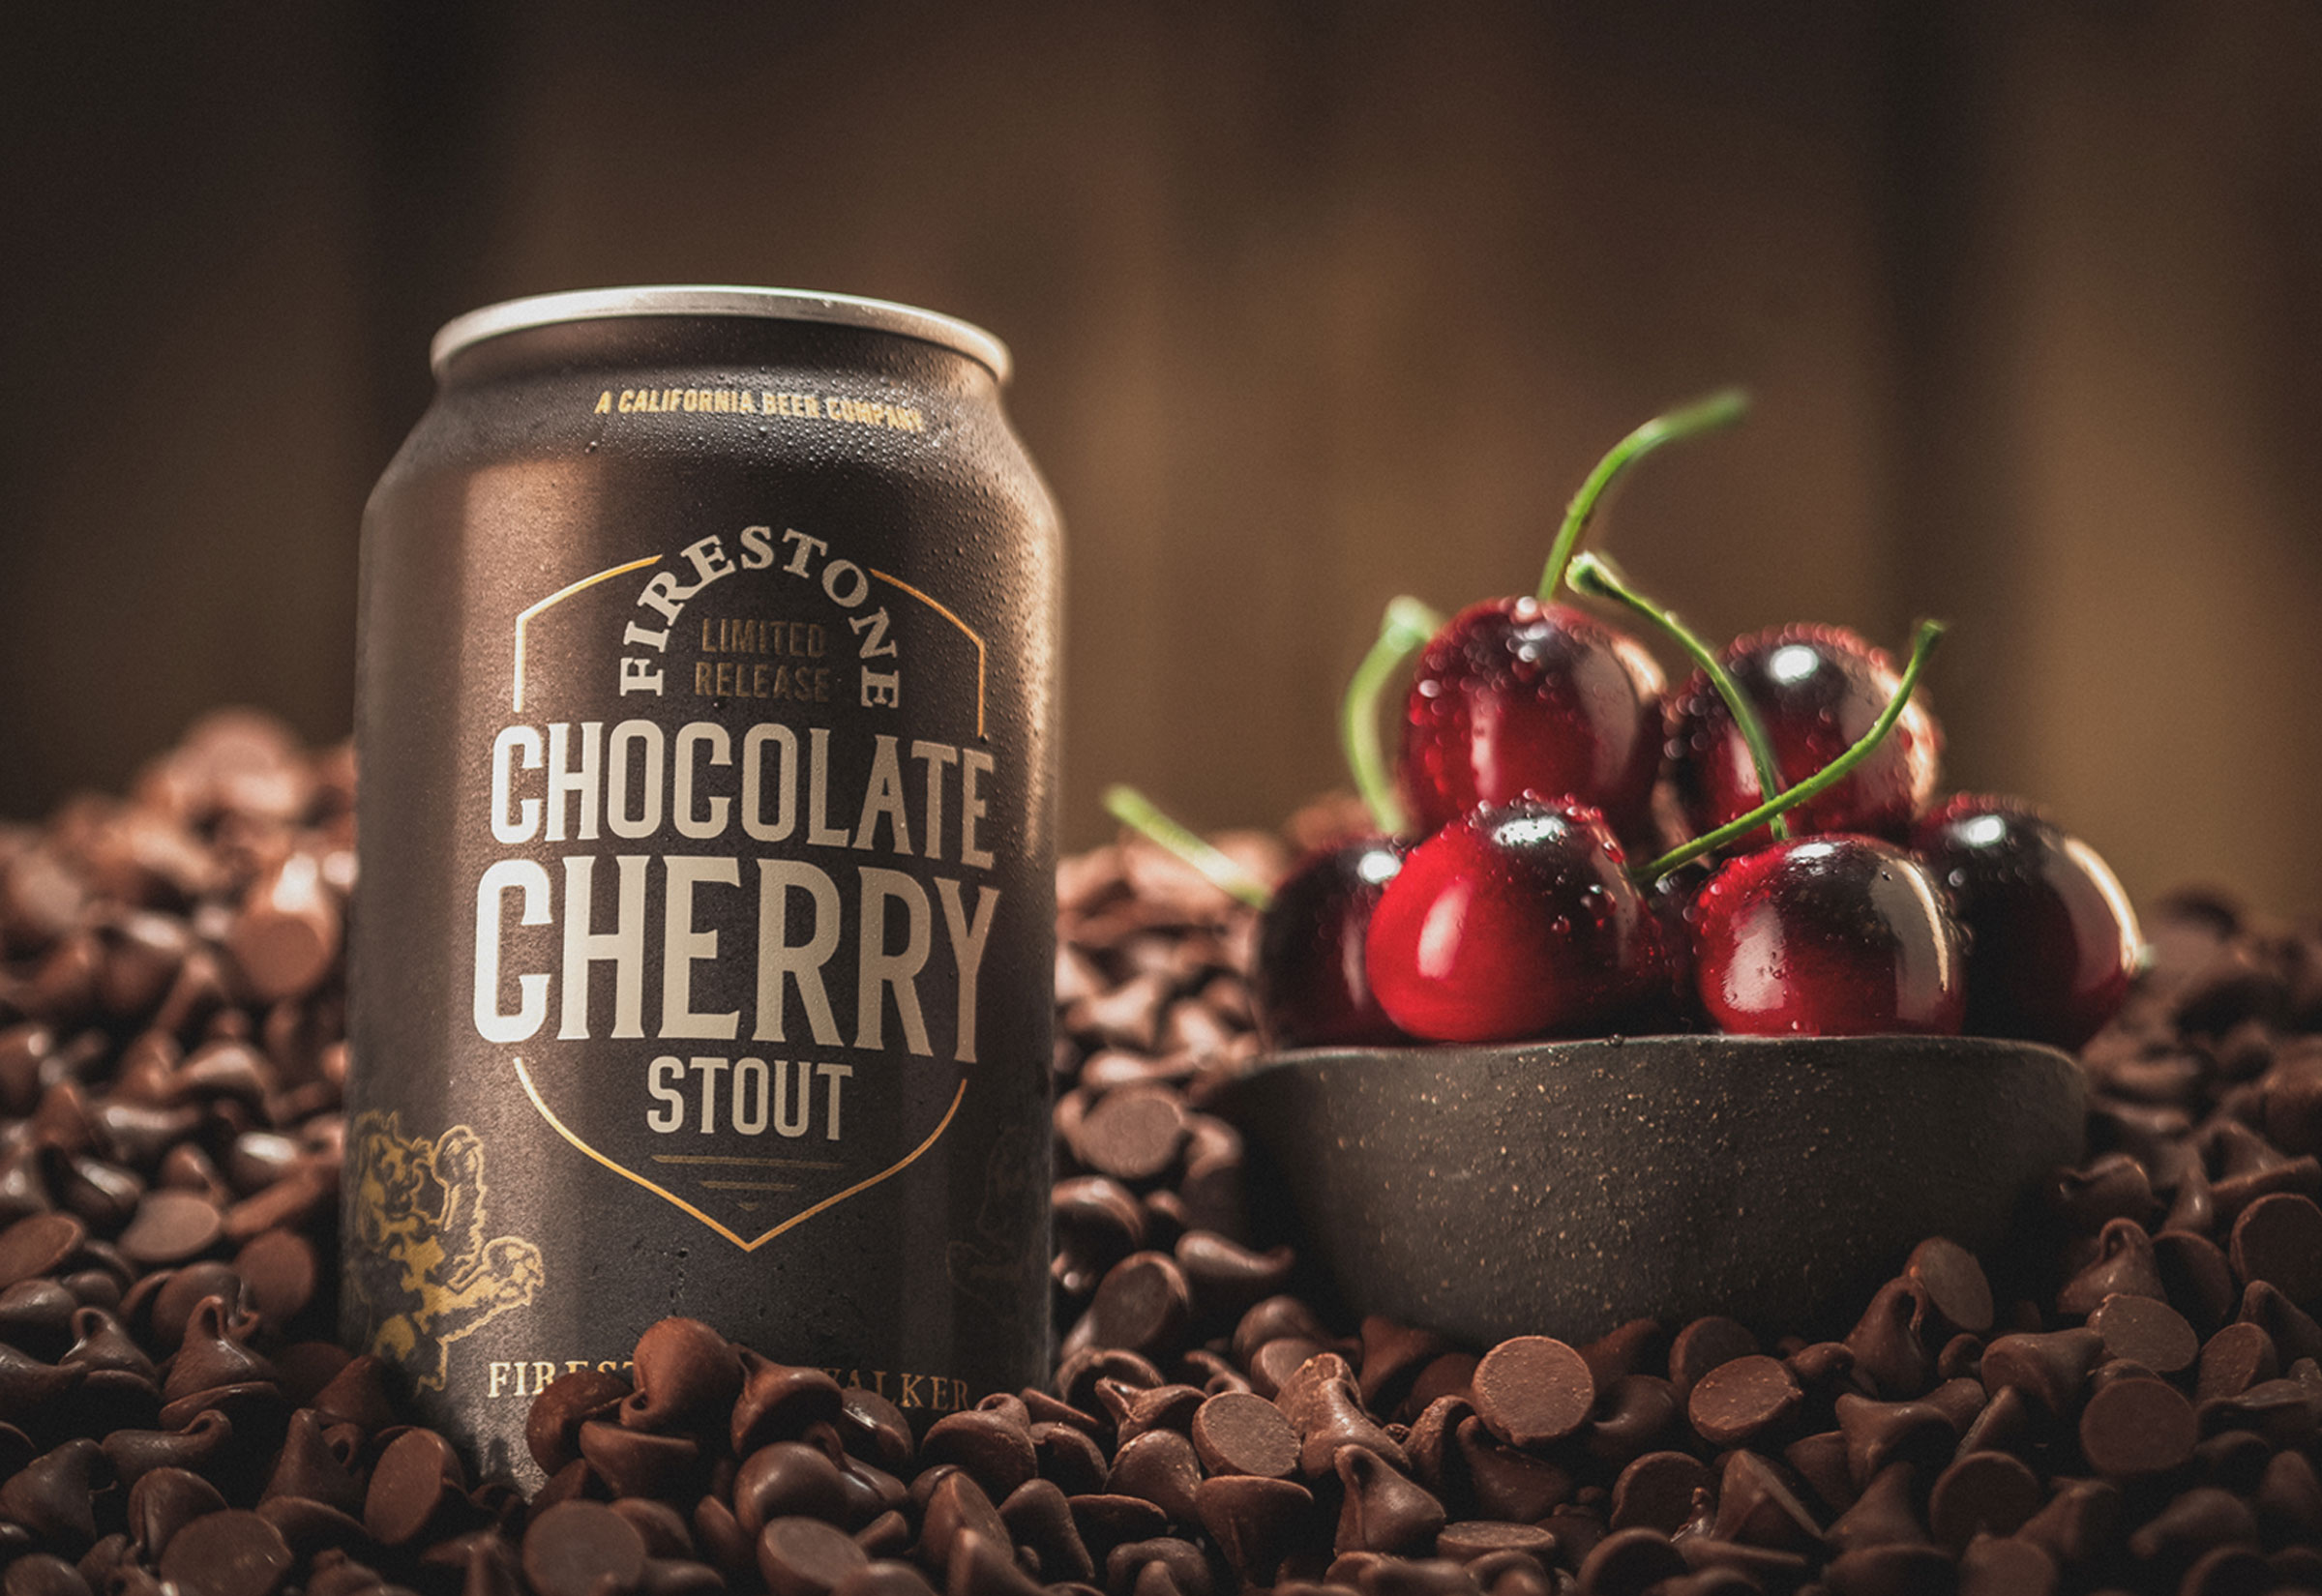 image of Chocolate Cherry Stout courtesy of Firestone Walker Brewing